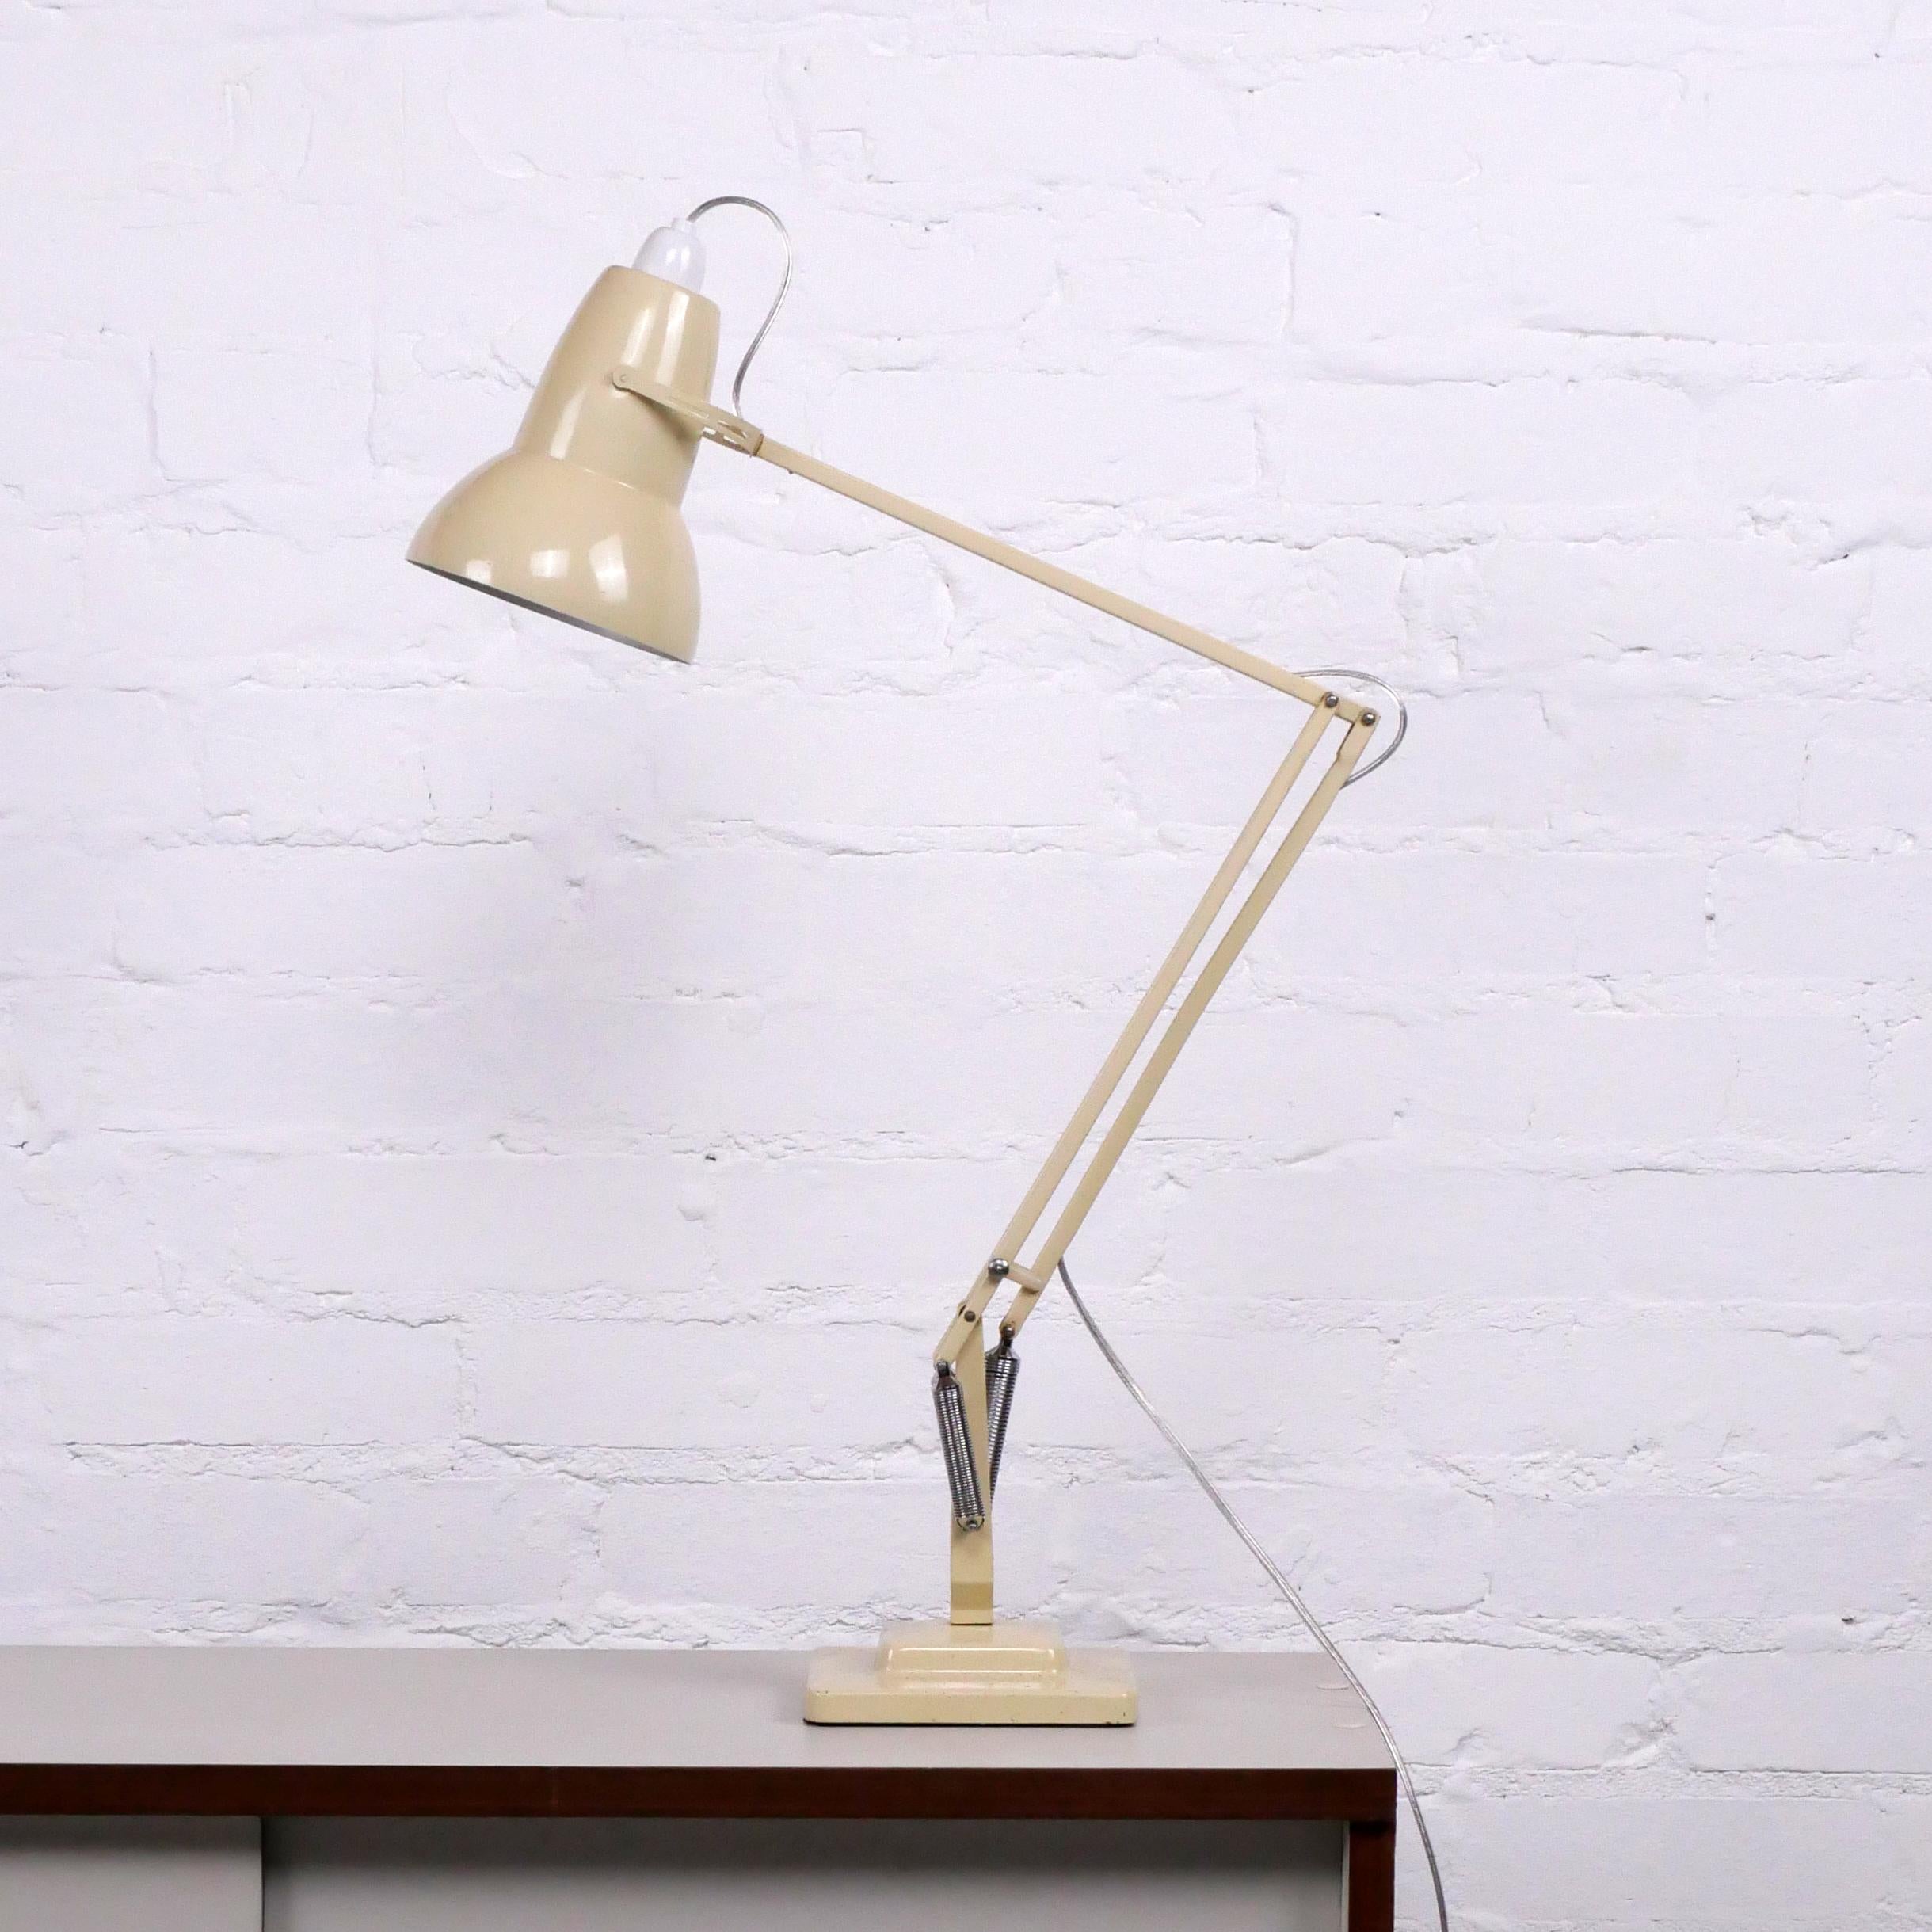 George Carwardine (Designer), UK
Herbert Terry & Sons (manufacturer), UK

Anglepoise lamp, model 1227, manufactured 1938-68

Original cream painted finish, chromed metal fittings, felt to underside of base. New bulb fitting. Re-wired and fully